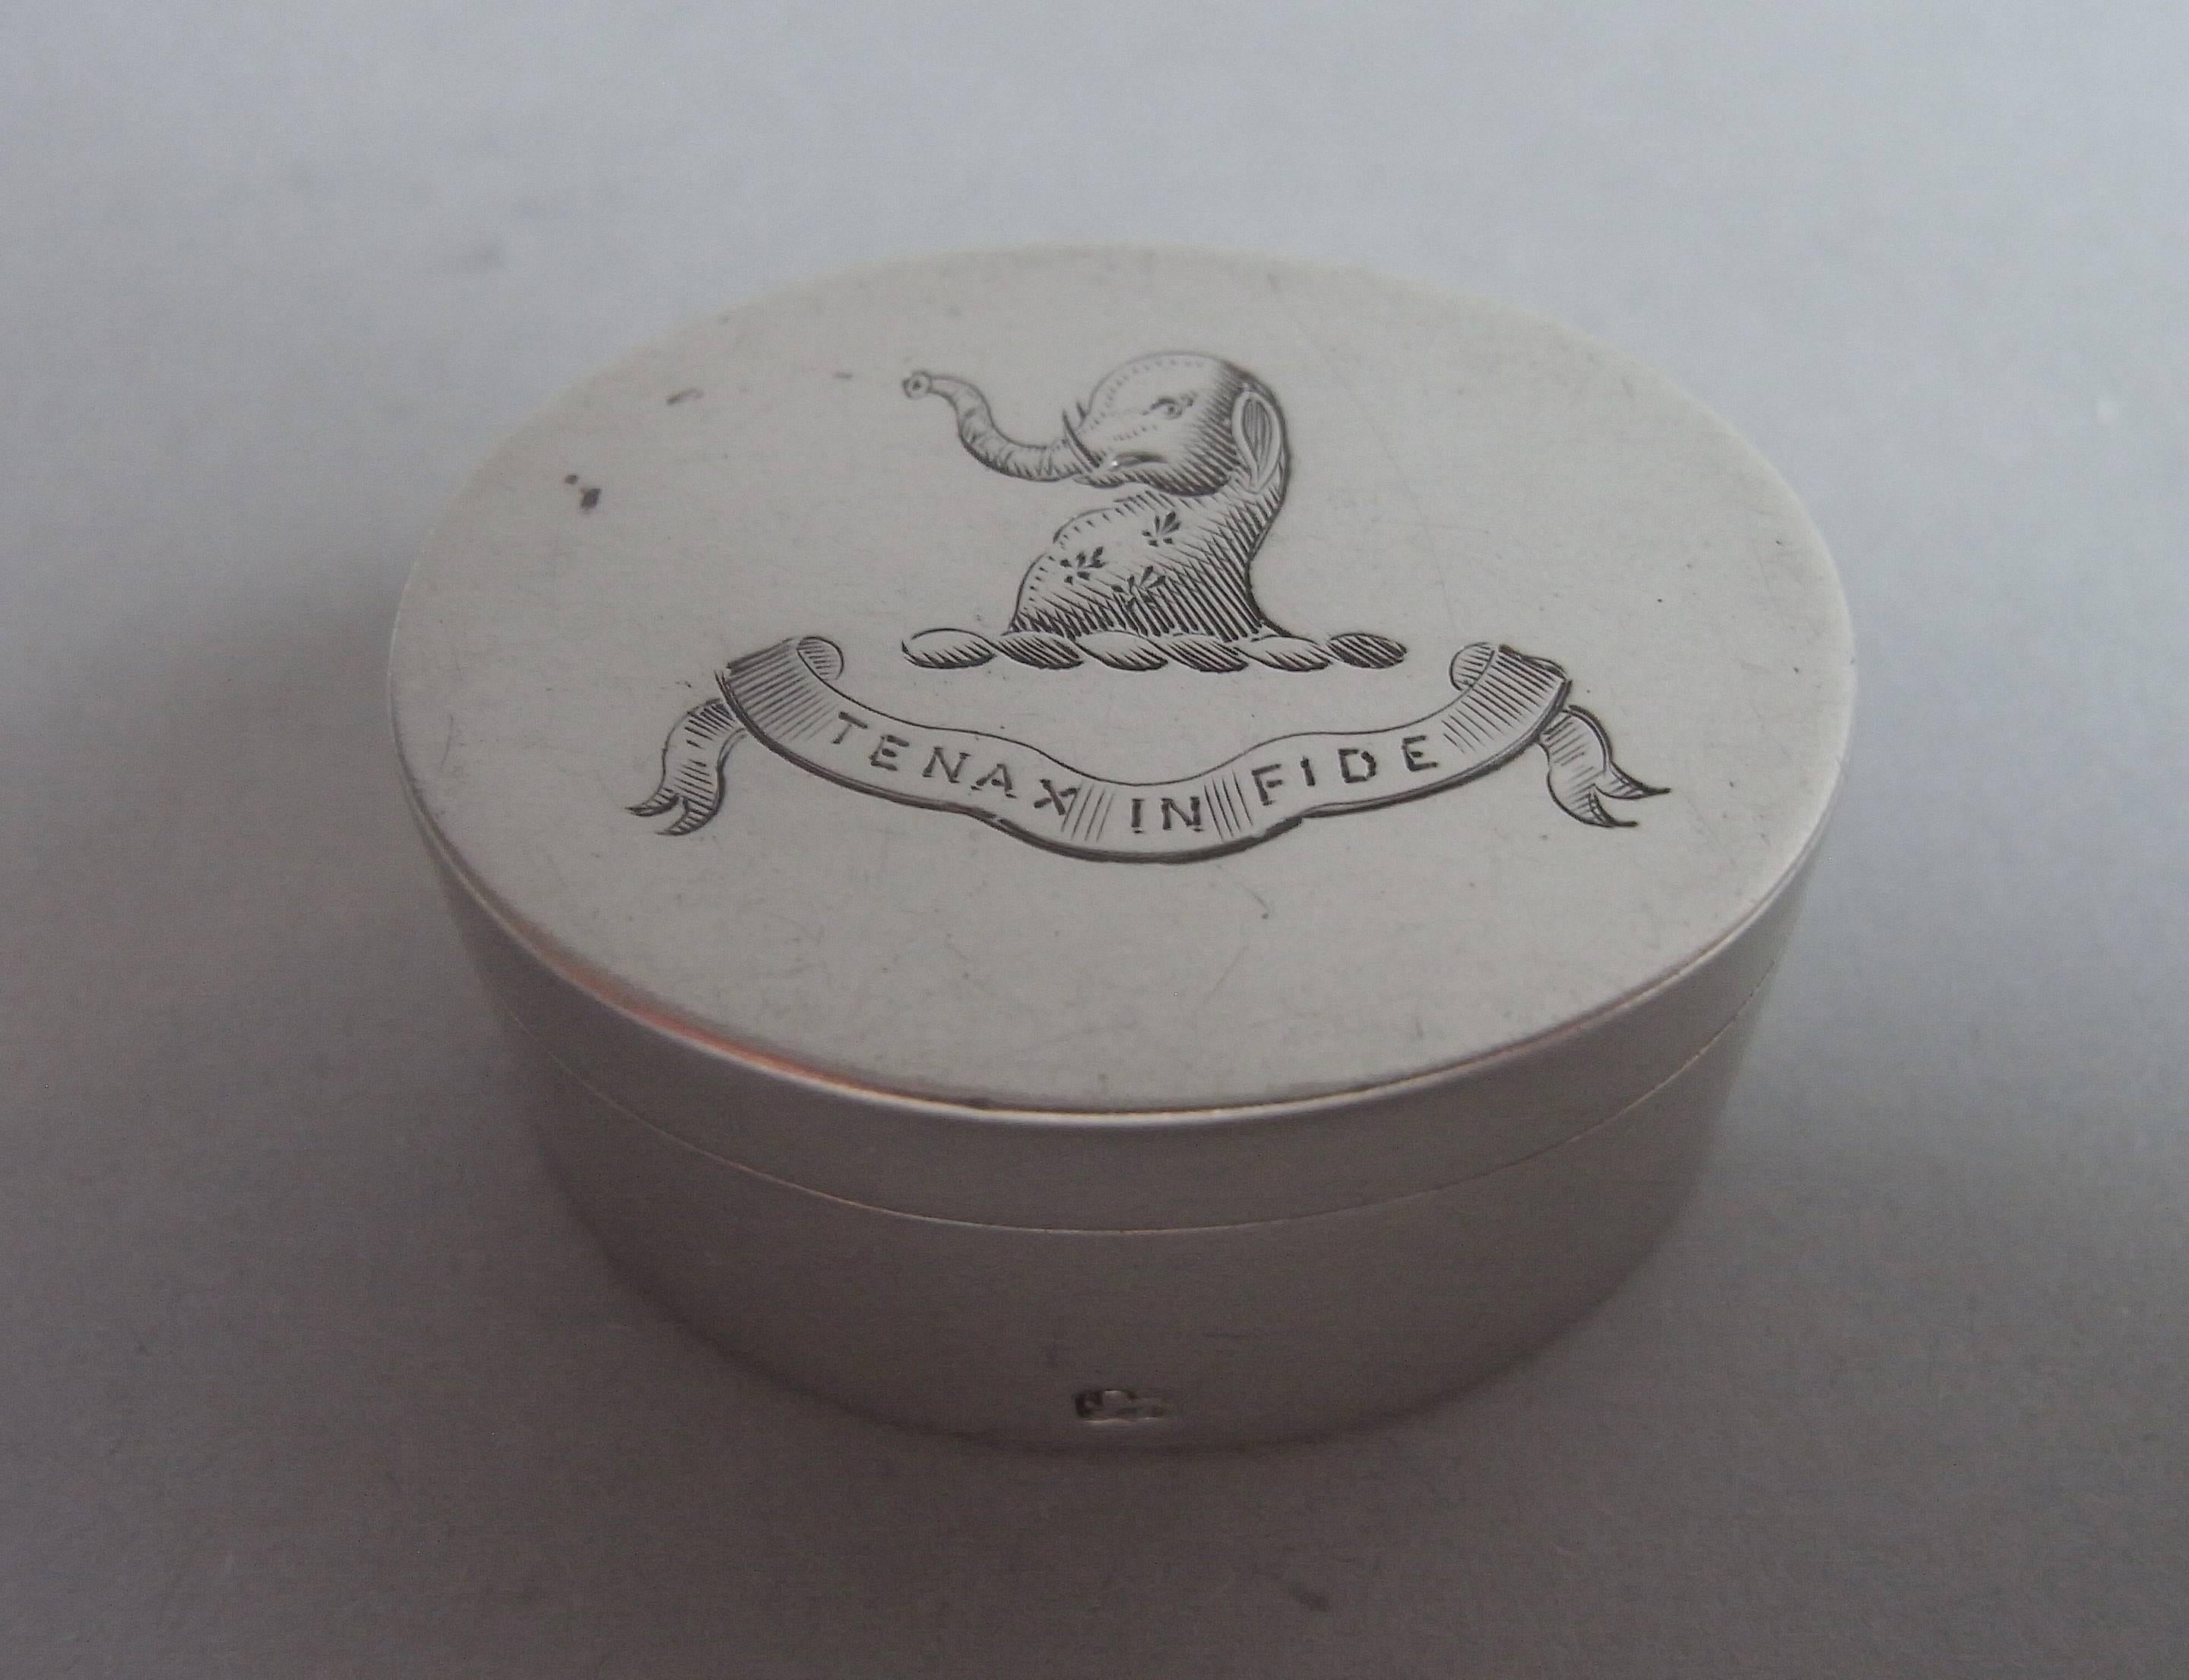 The Vinaigrette is oval in form, with deep sides, and displays a plain design. The cover is beautifully engraved with a contemporary elephant Crest, with the Motto 